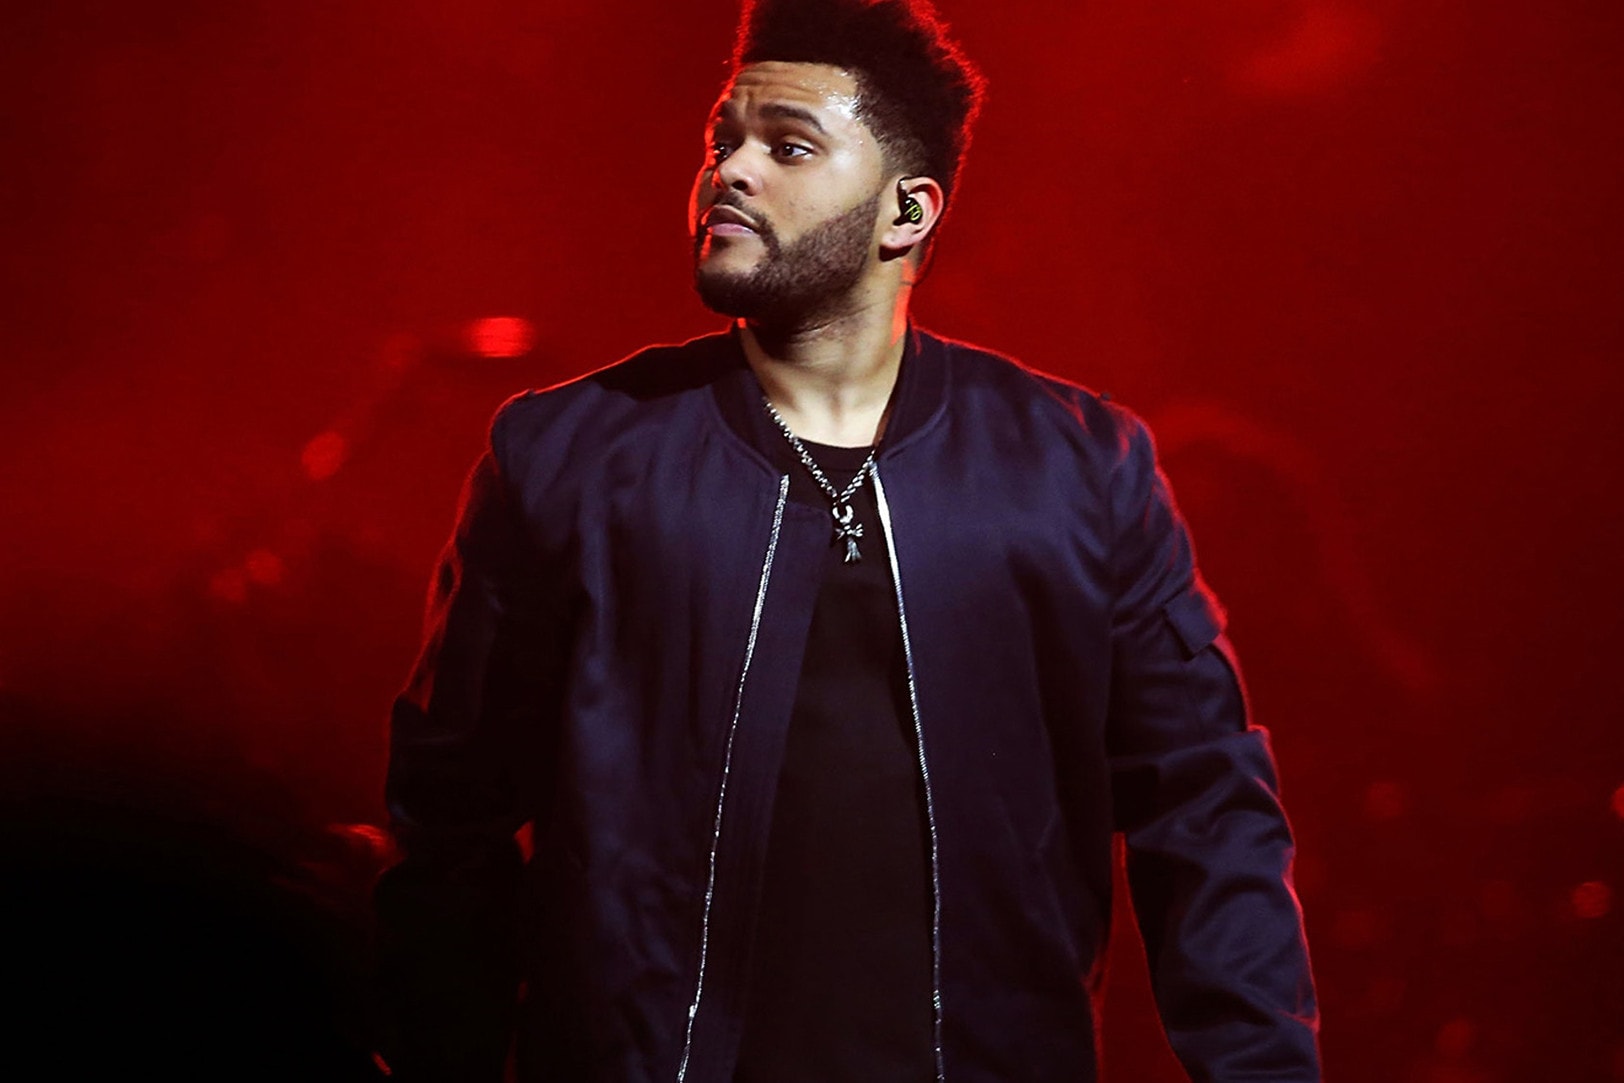 The Weeknd Chapter 6 Album Announcement Toronto Hxouse Performance Abel Tesfaye La Mar Taylor